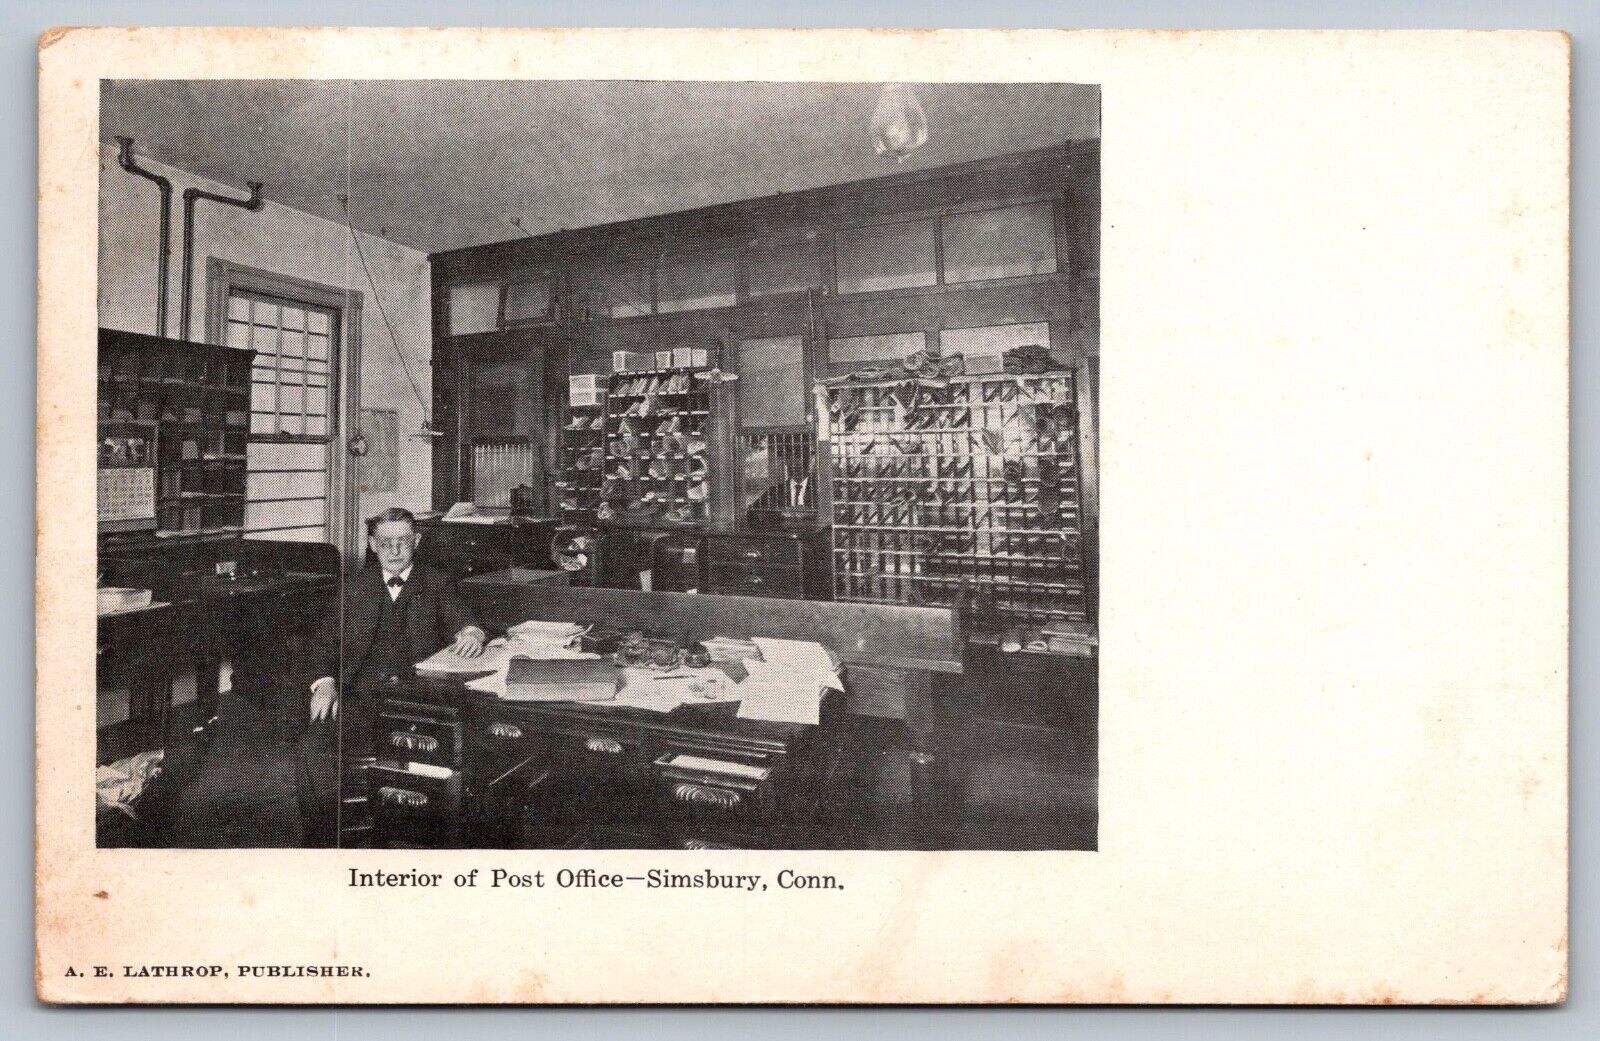 1905 SIMSBURY CONNECTICUT INTERIOR OF POST OFFICE LATHROP PUBLISHER W/WORKER